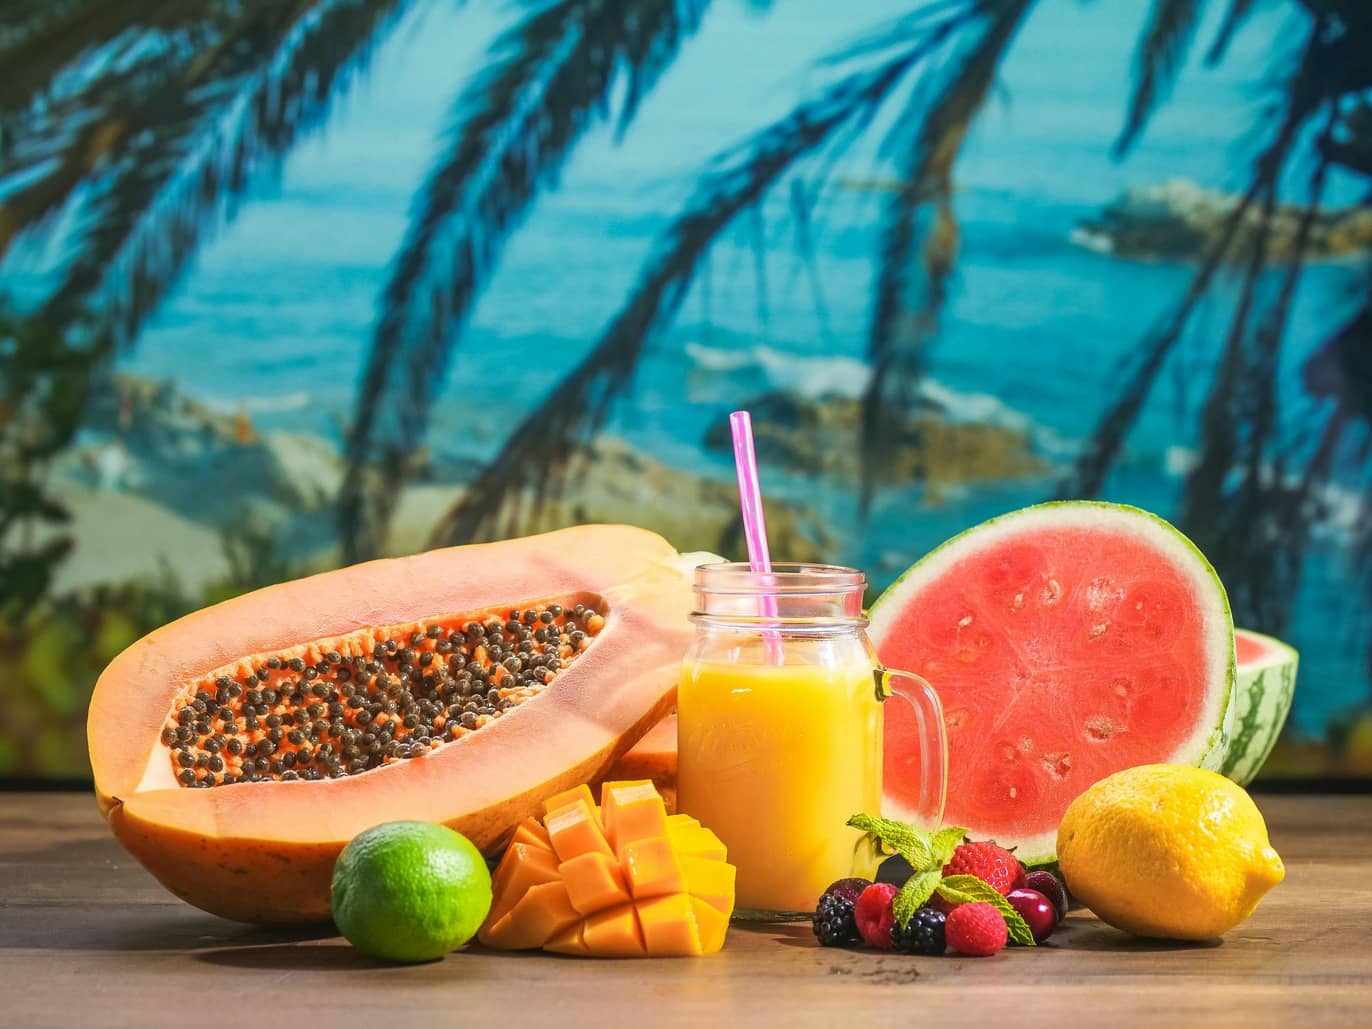 A mango cocktail and a variety of fruits overlooking the ocean